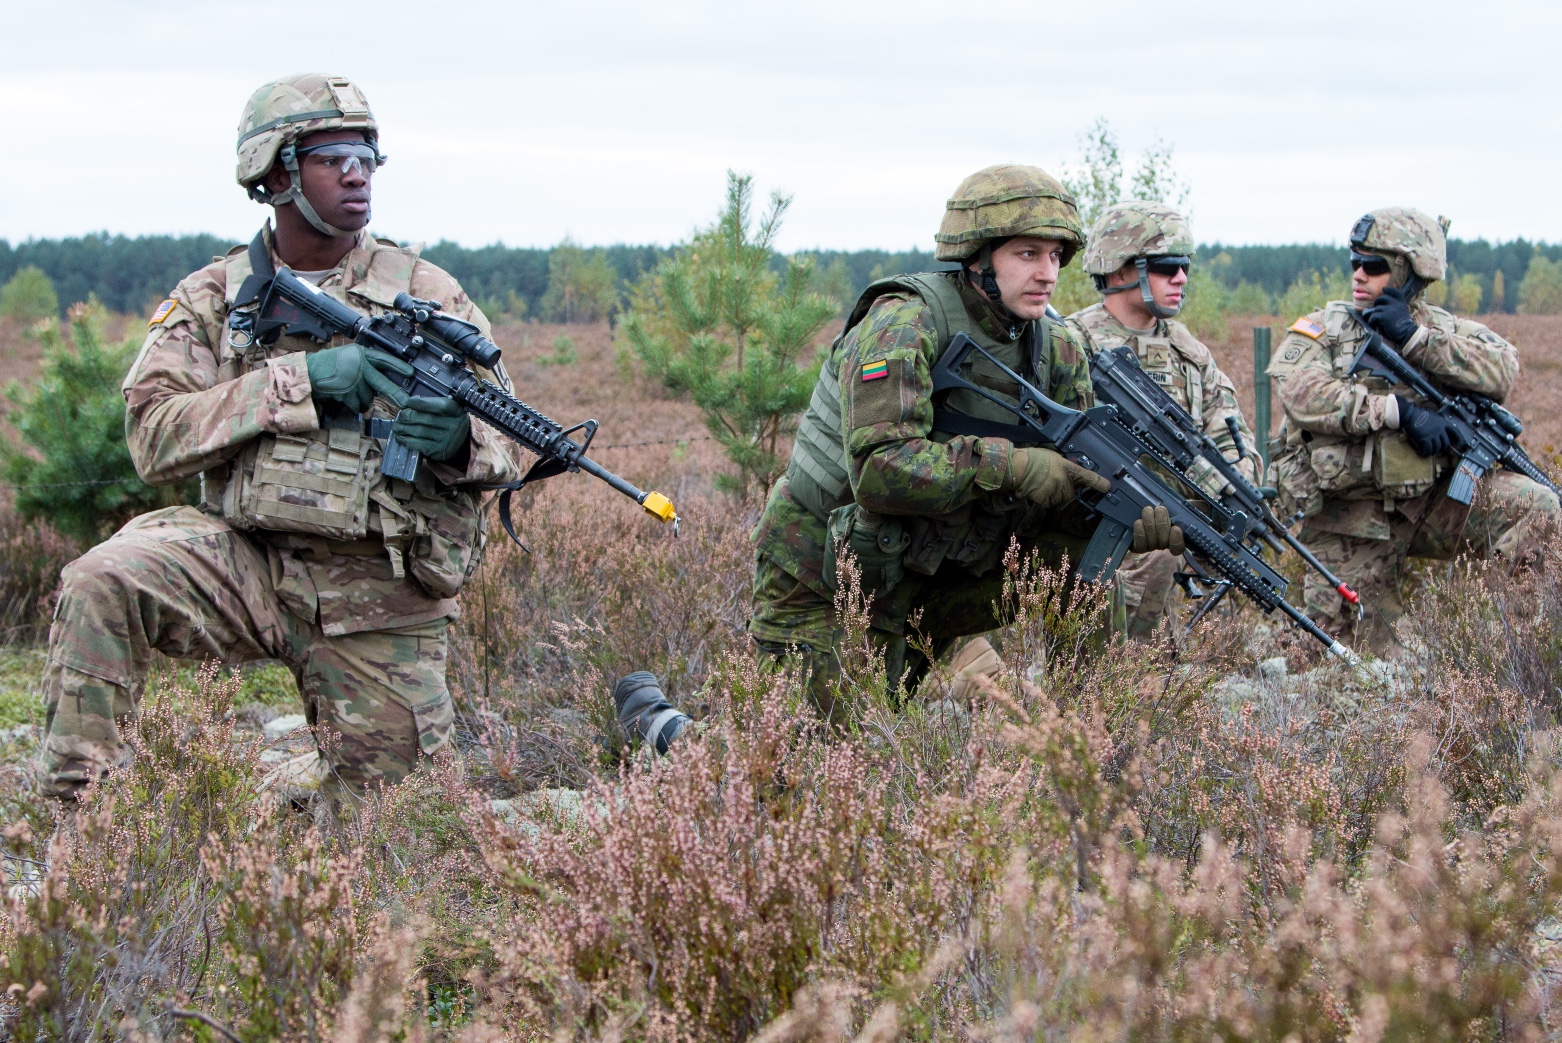 Combat engineers from the 1st Bn., 503rd Inf. Regt., 173rd Airborne Brigade and Juozas Vitkaus Engineer Battalion of the Lithuanian Land Forces, provide security during Operation Eagle Shock.